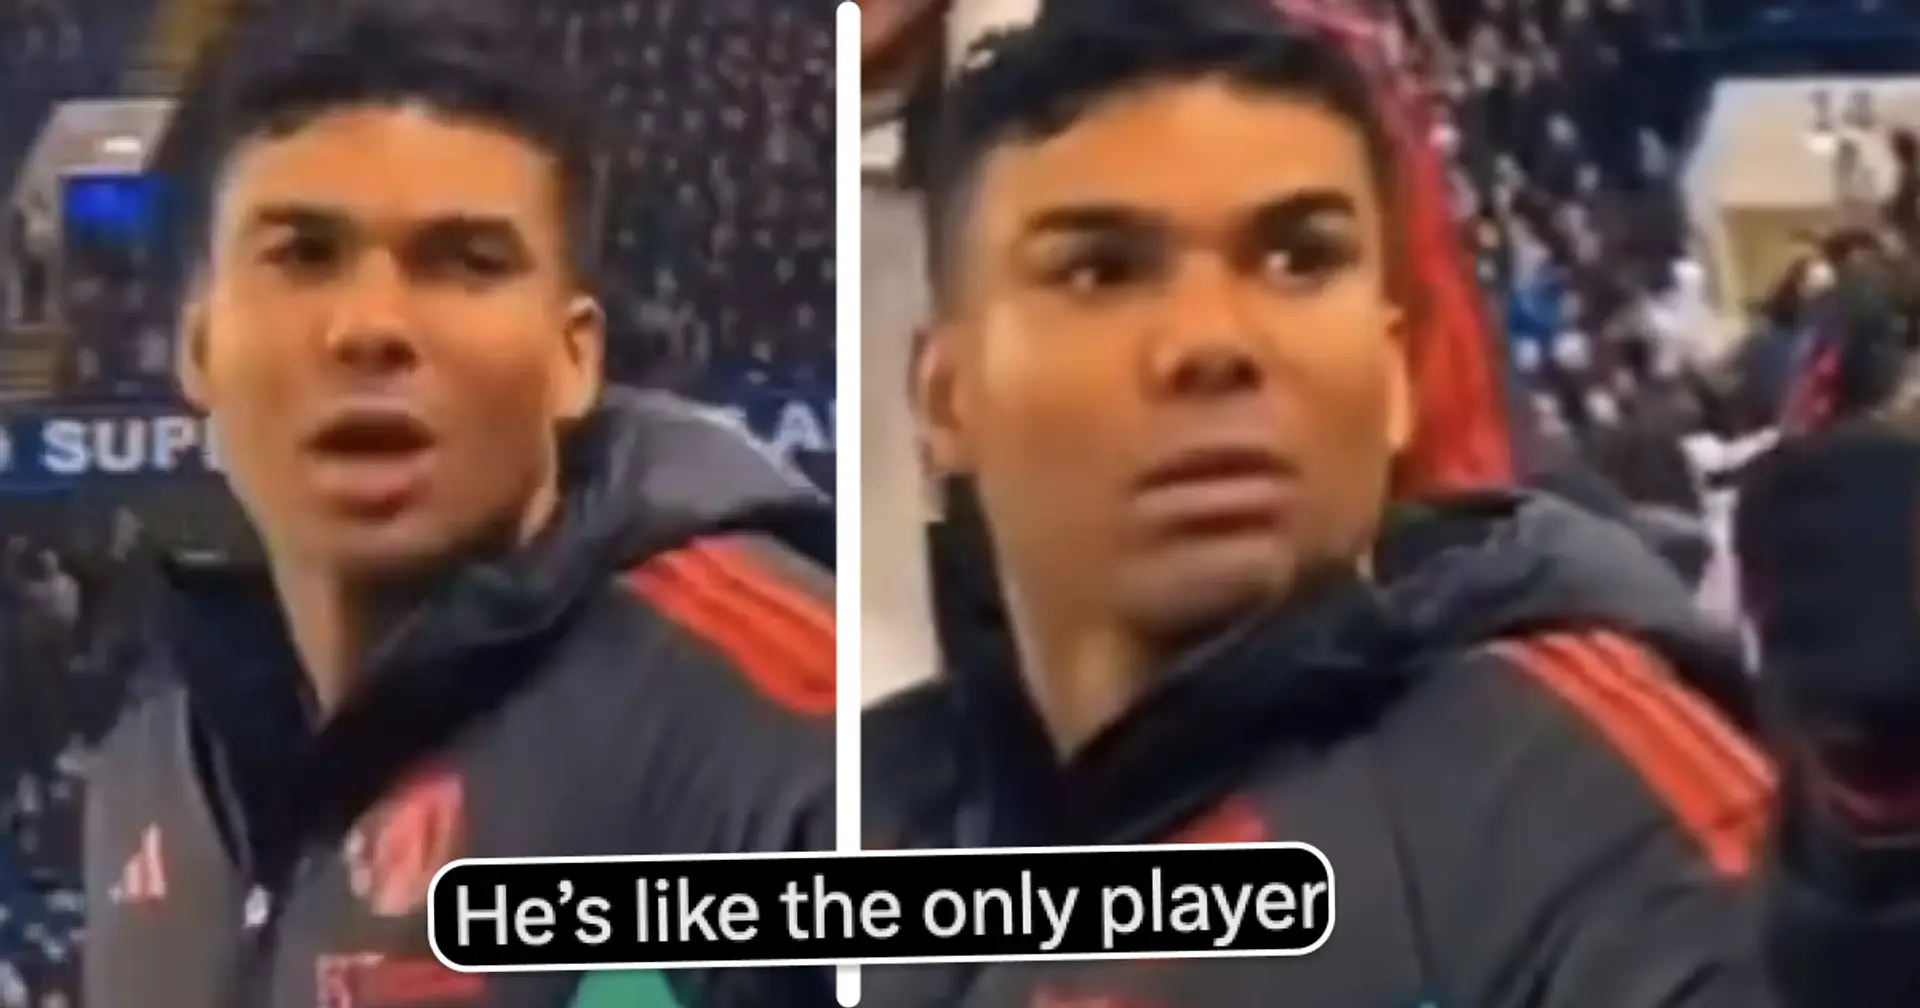 'I feel bad, man': How Casemiro reacted to Chelsea fan saying 'sit down, you c**t'